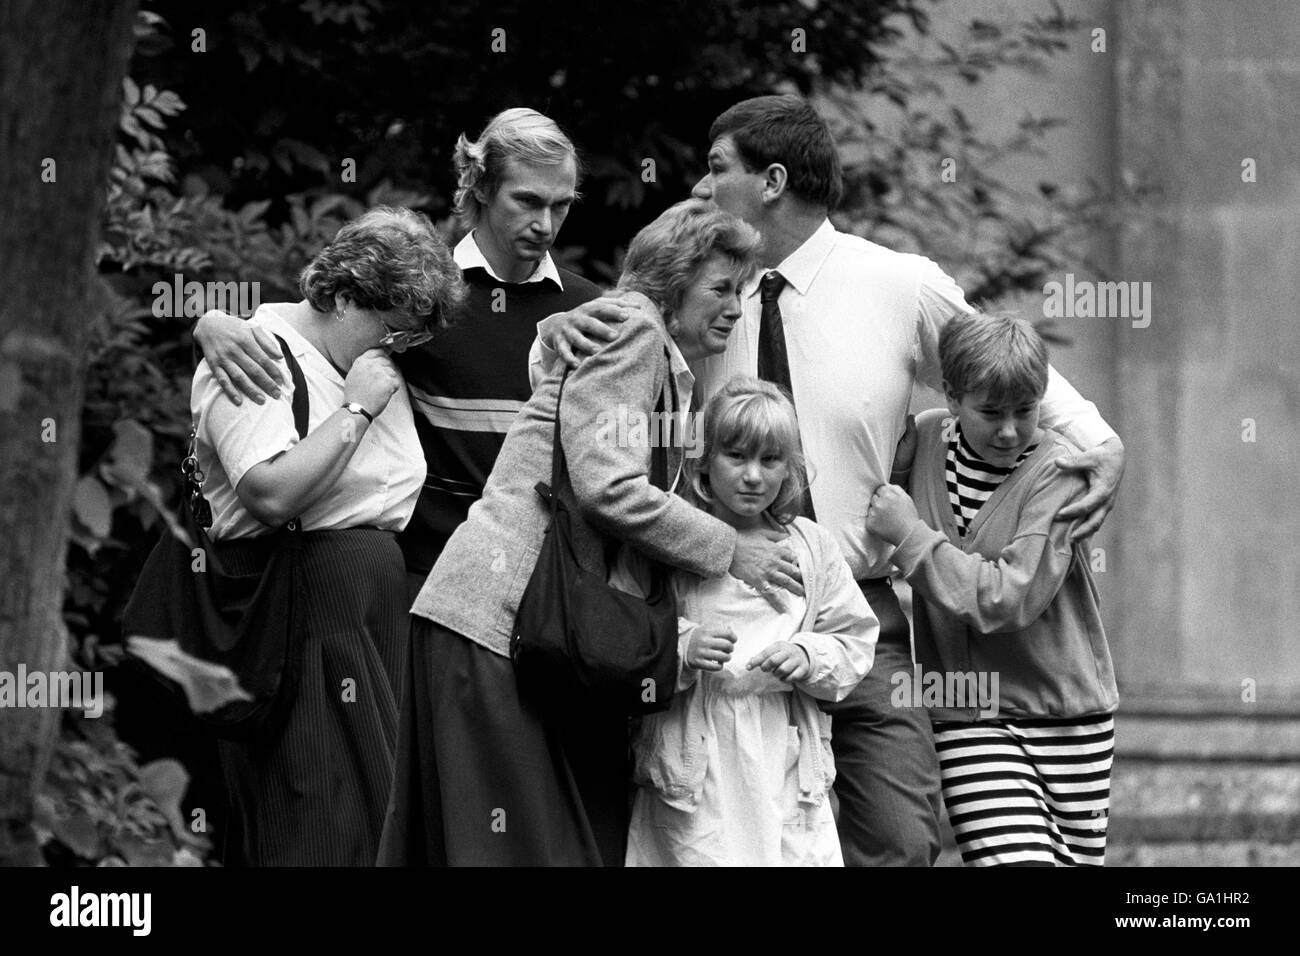 Distraught relatives leave the parish church of St Lawrence in Hungerford after an emotional Holy Communion service following the massacre of 16 townspeople by crazed gunman Michael Ryan. Stock Photo